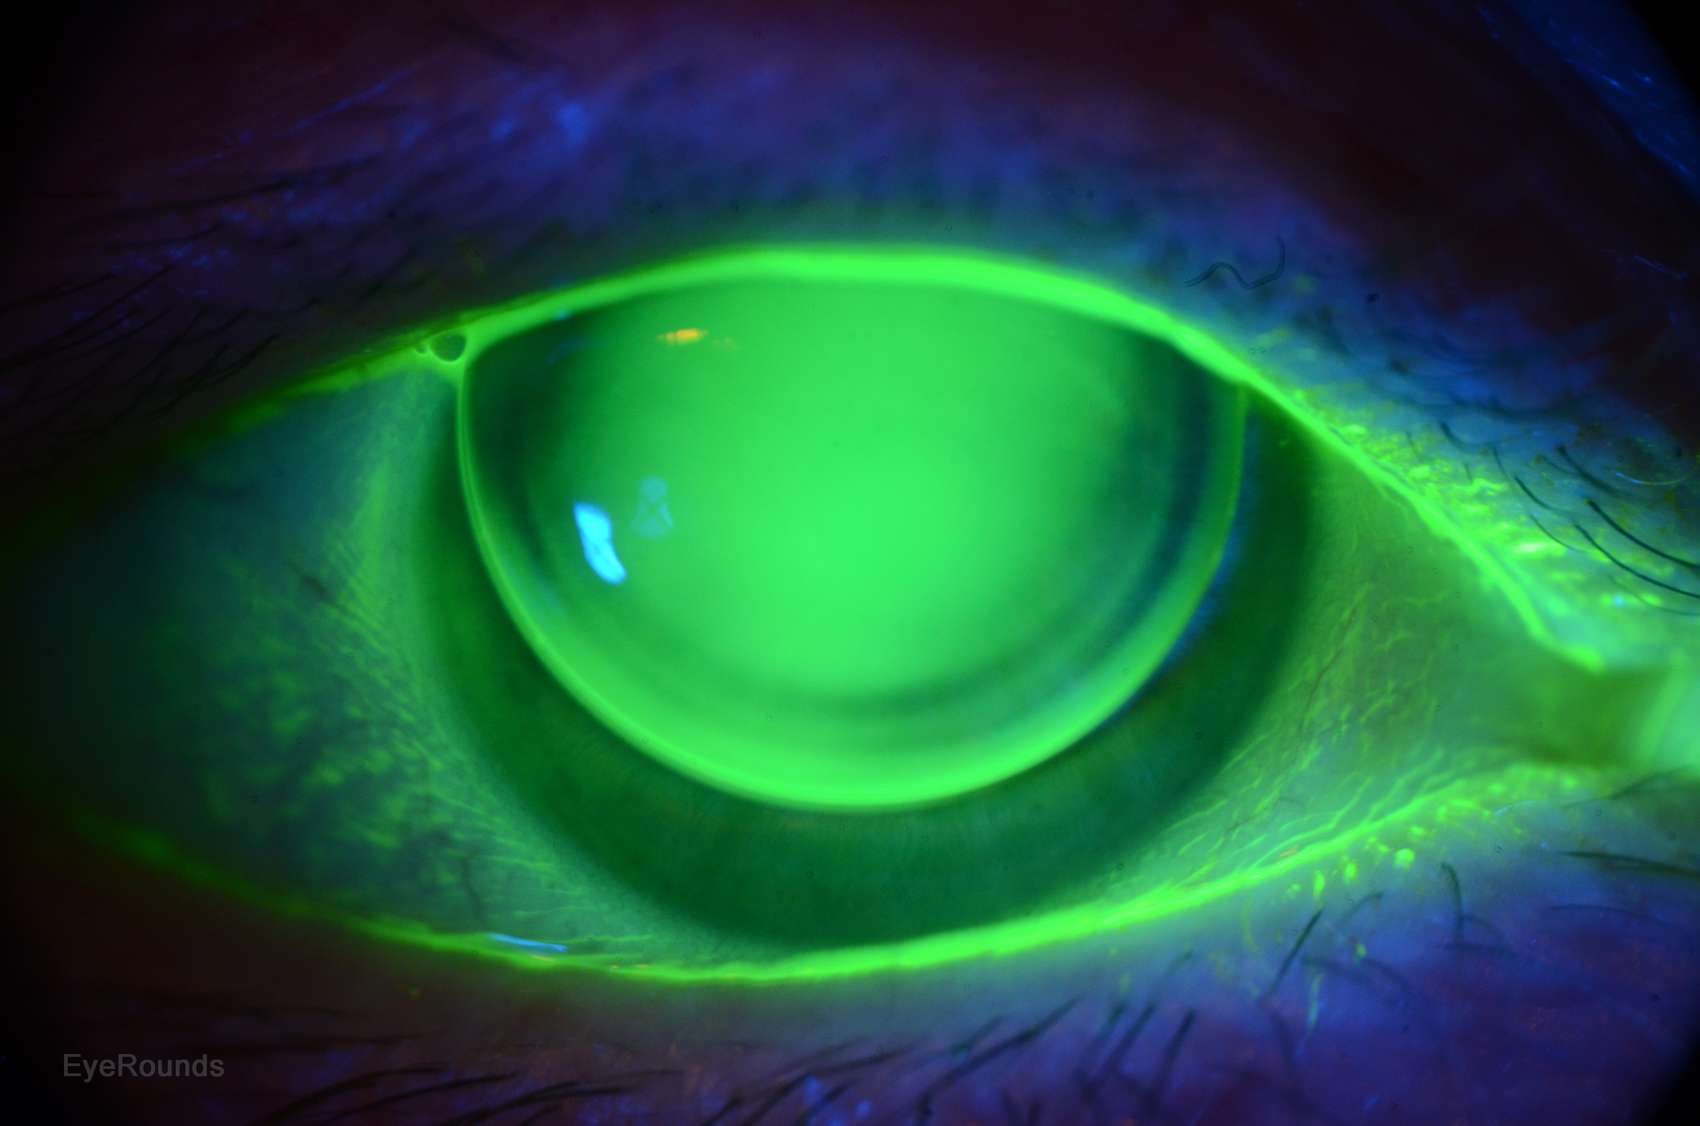 Typical Corneal Rigid Gas Permeable (RGP) Contact Lens